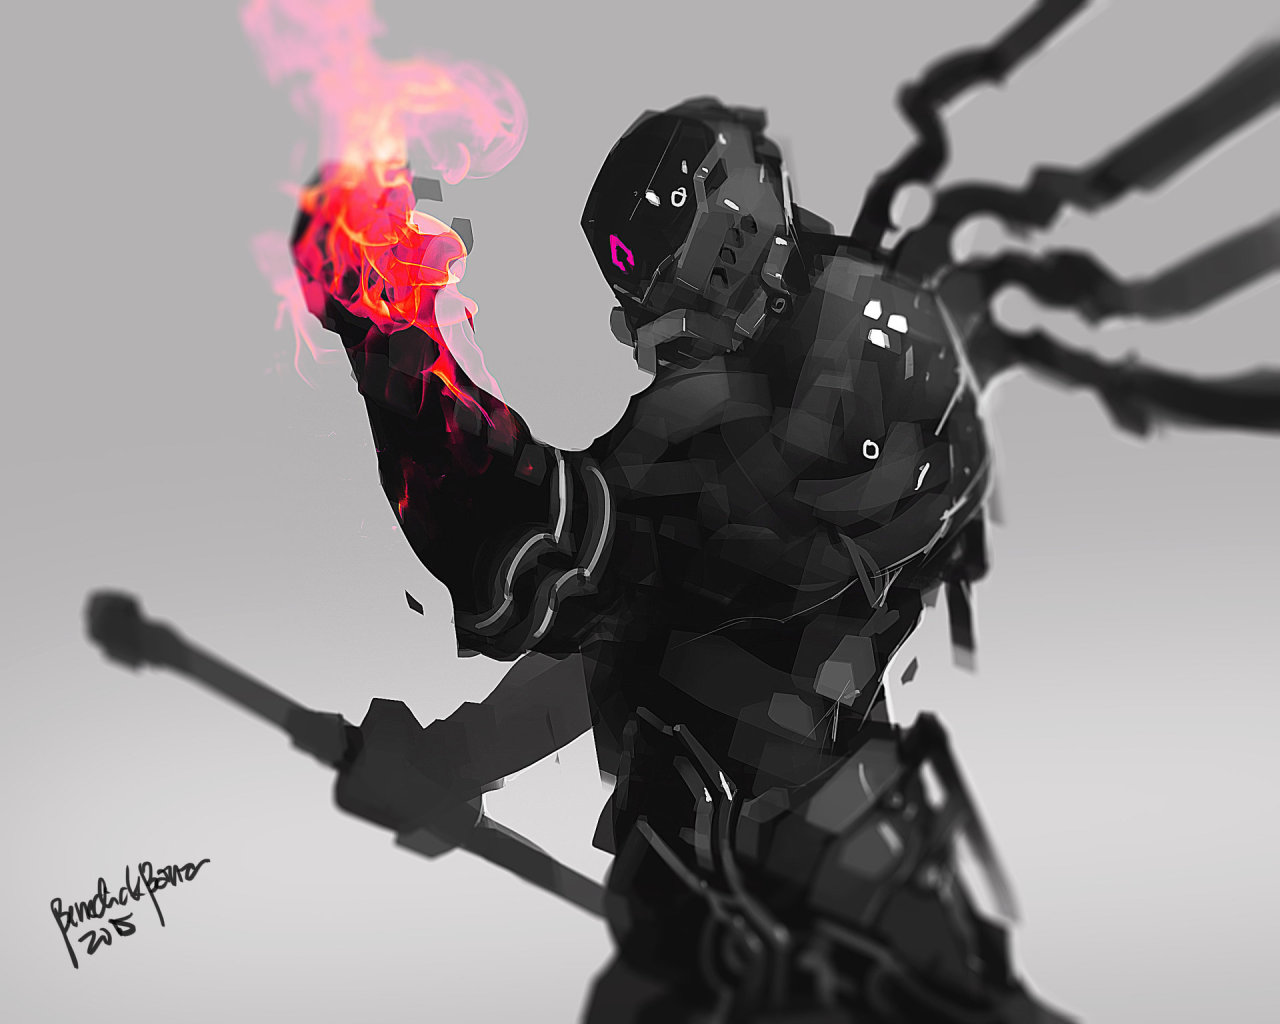 Gallahad of the Flame - by Benedick Bana
More selected art by Benedick Bana on my tumblr [here]